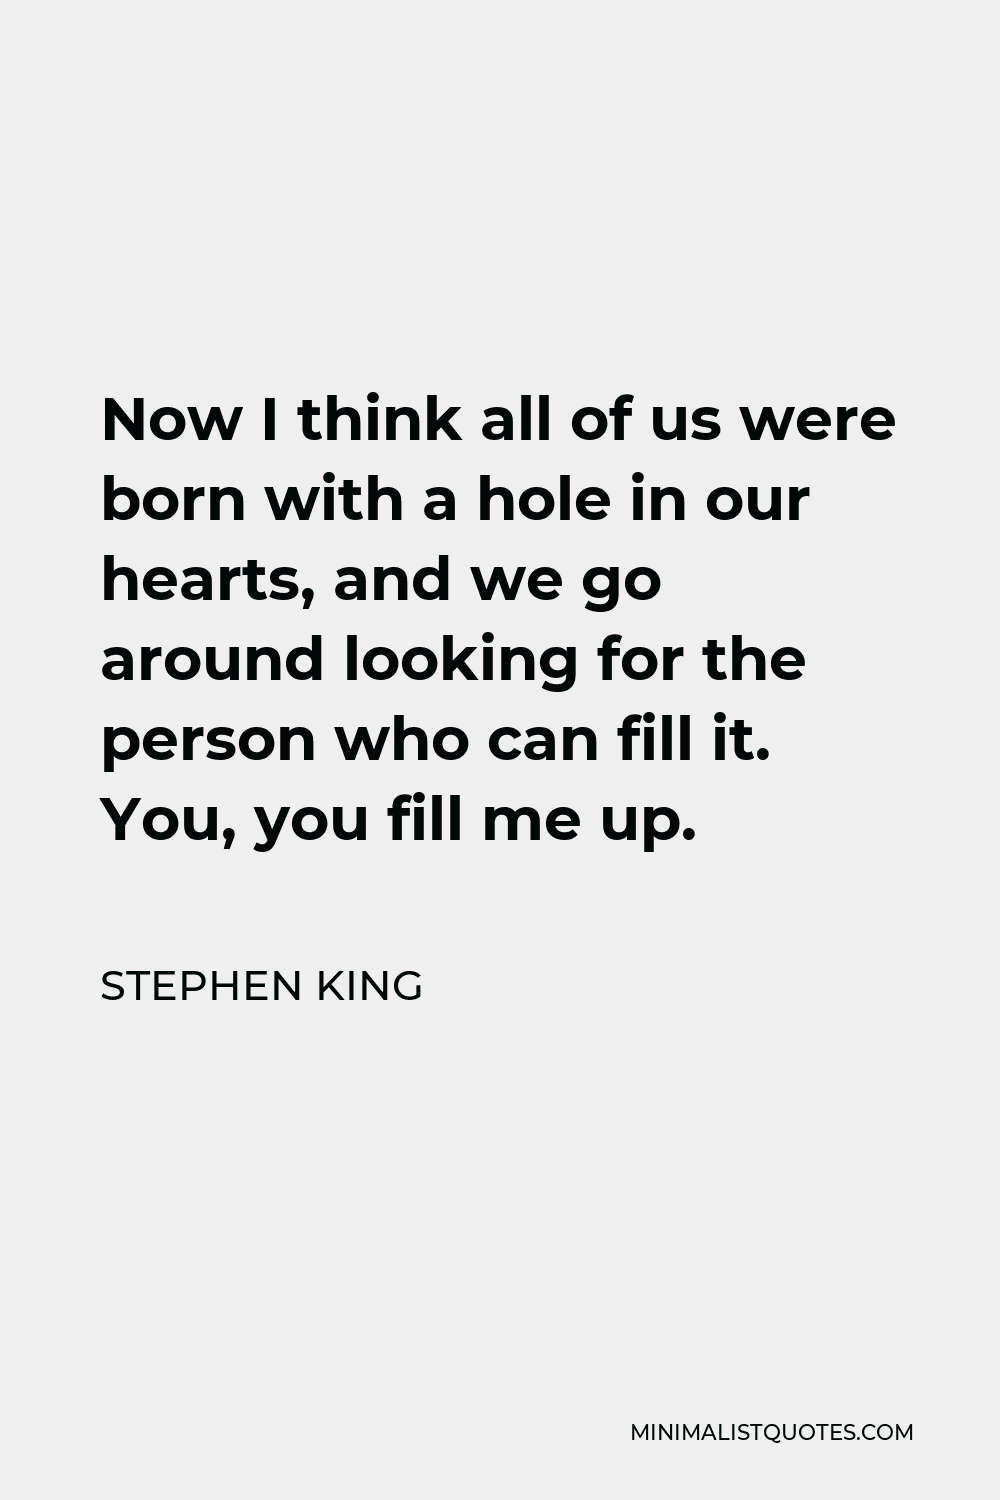 Stephen King Quote - Now I think all of us were born with a hole in our hearts, and we go around looking for the person who can fill it. You, you fill me up.